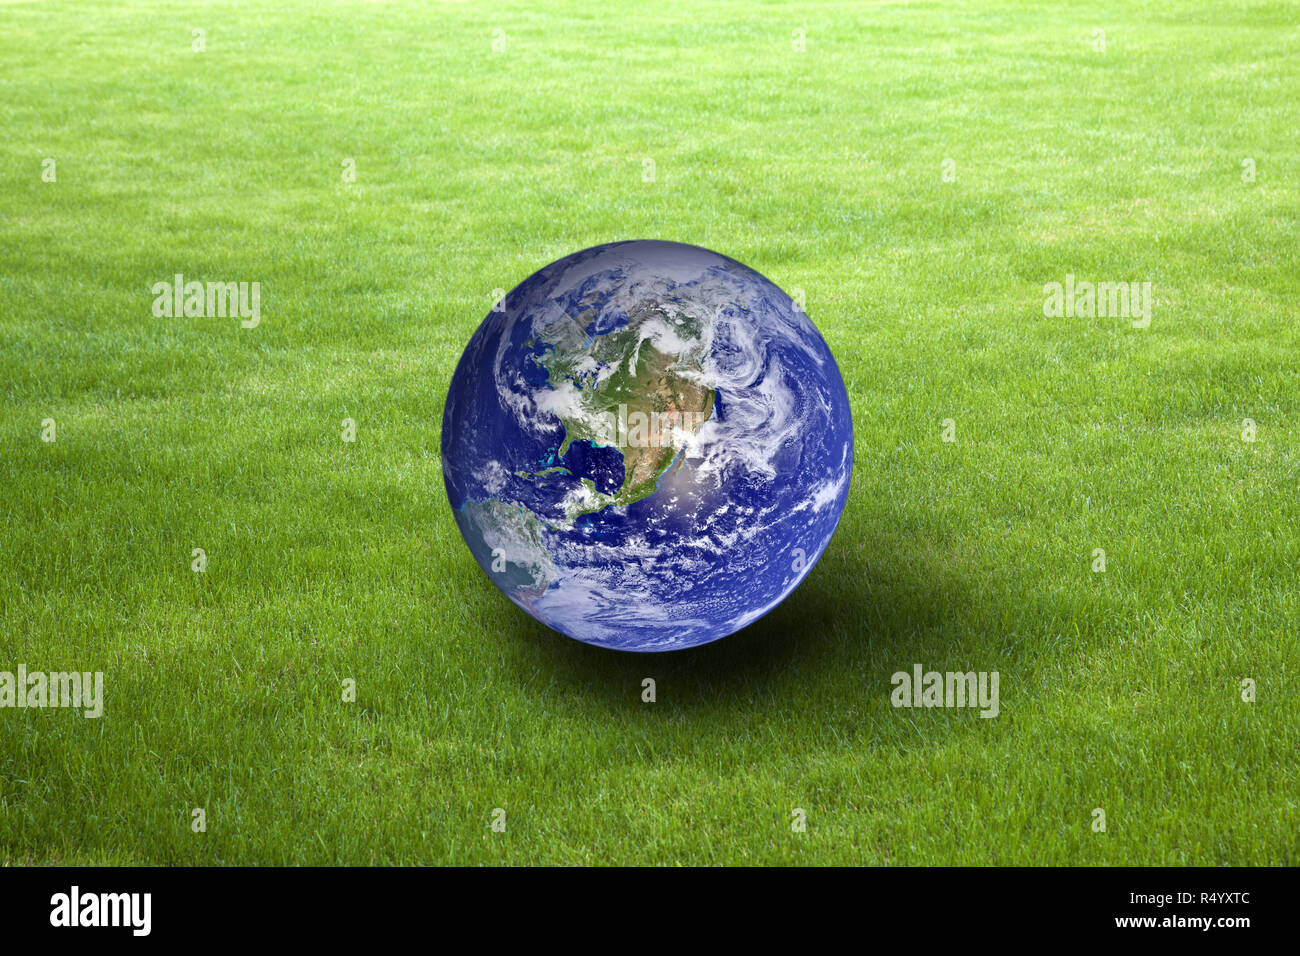 Planet Earth on green grass. Earth Day concept. Earth image provided by Nasa. Stock Photo